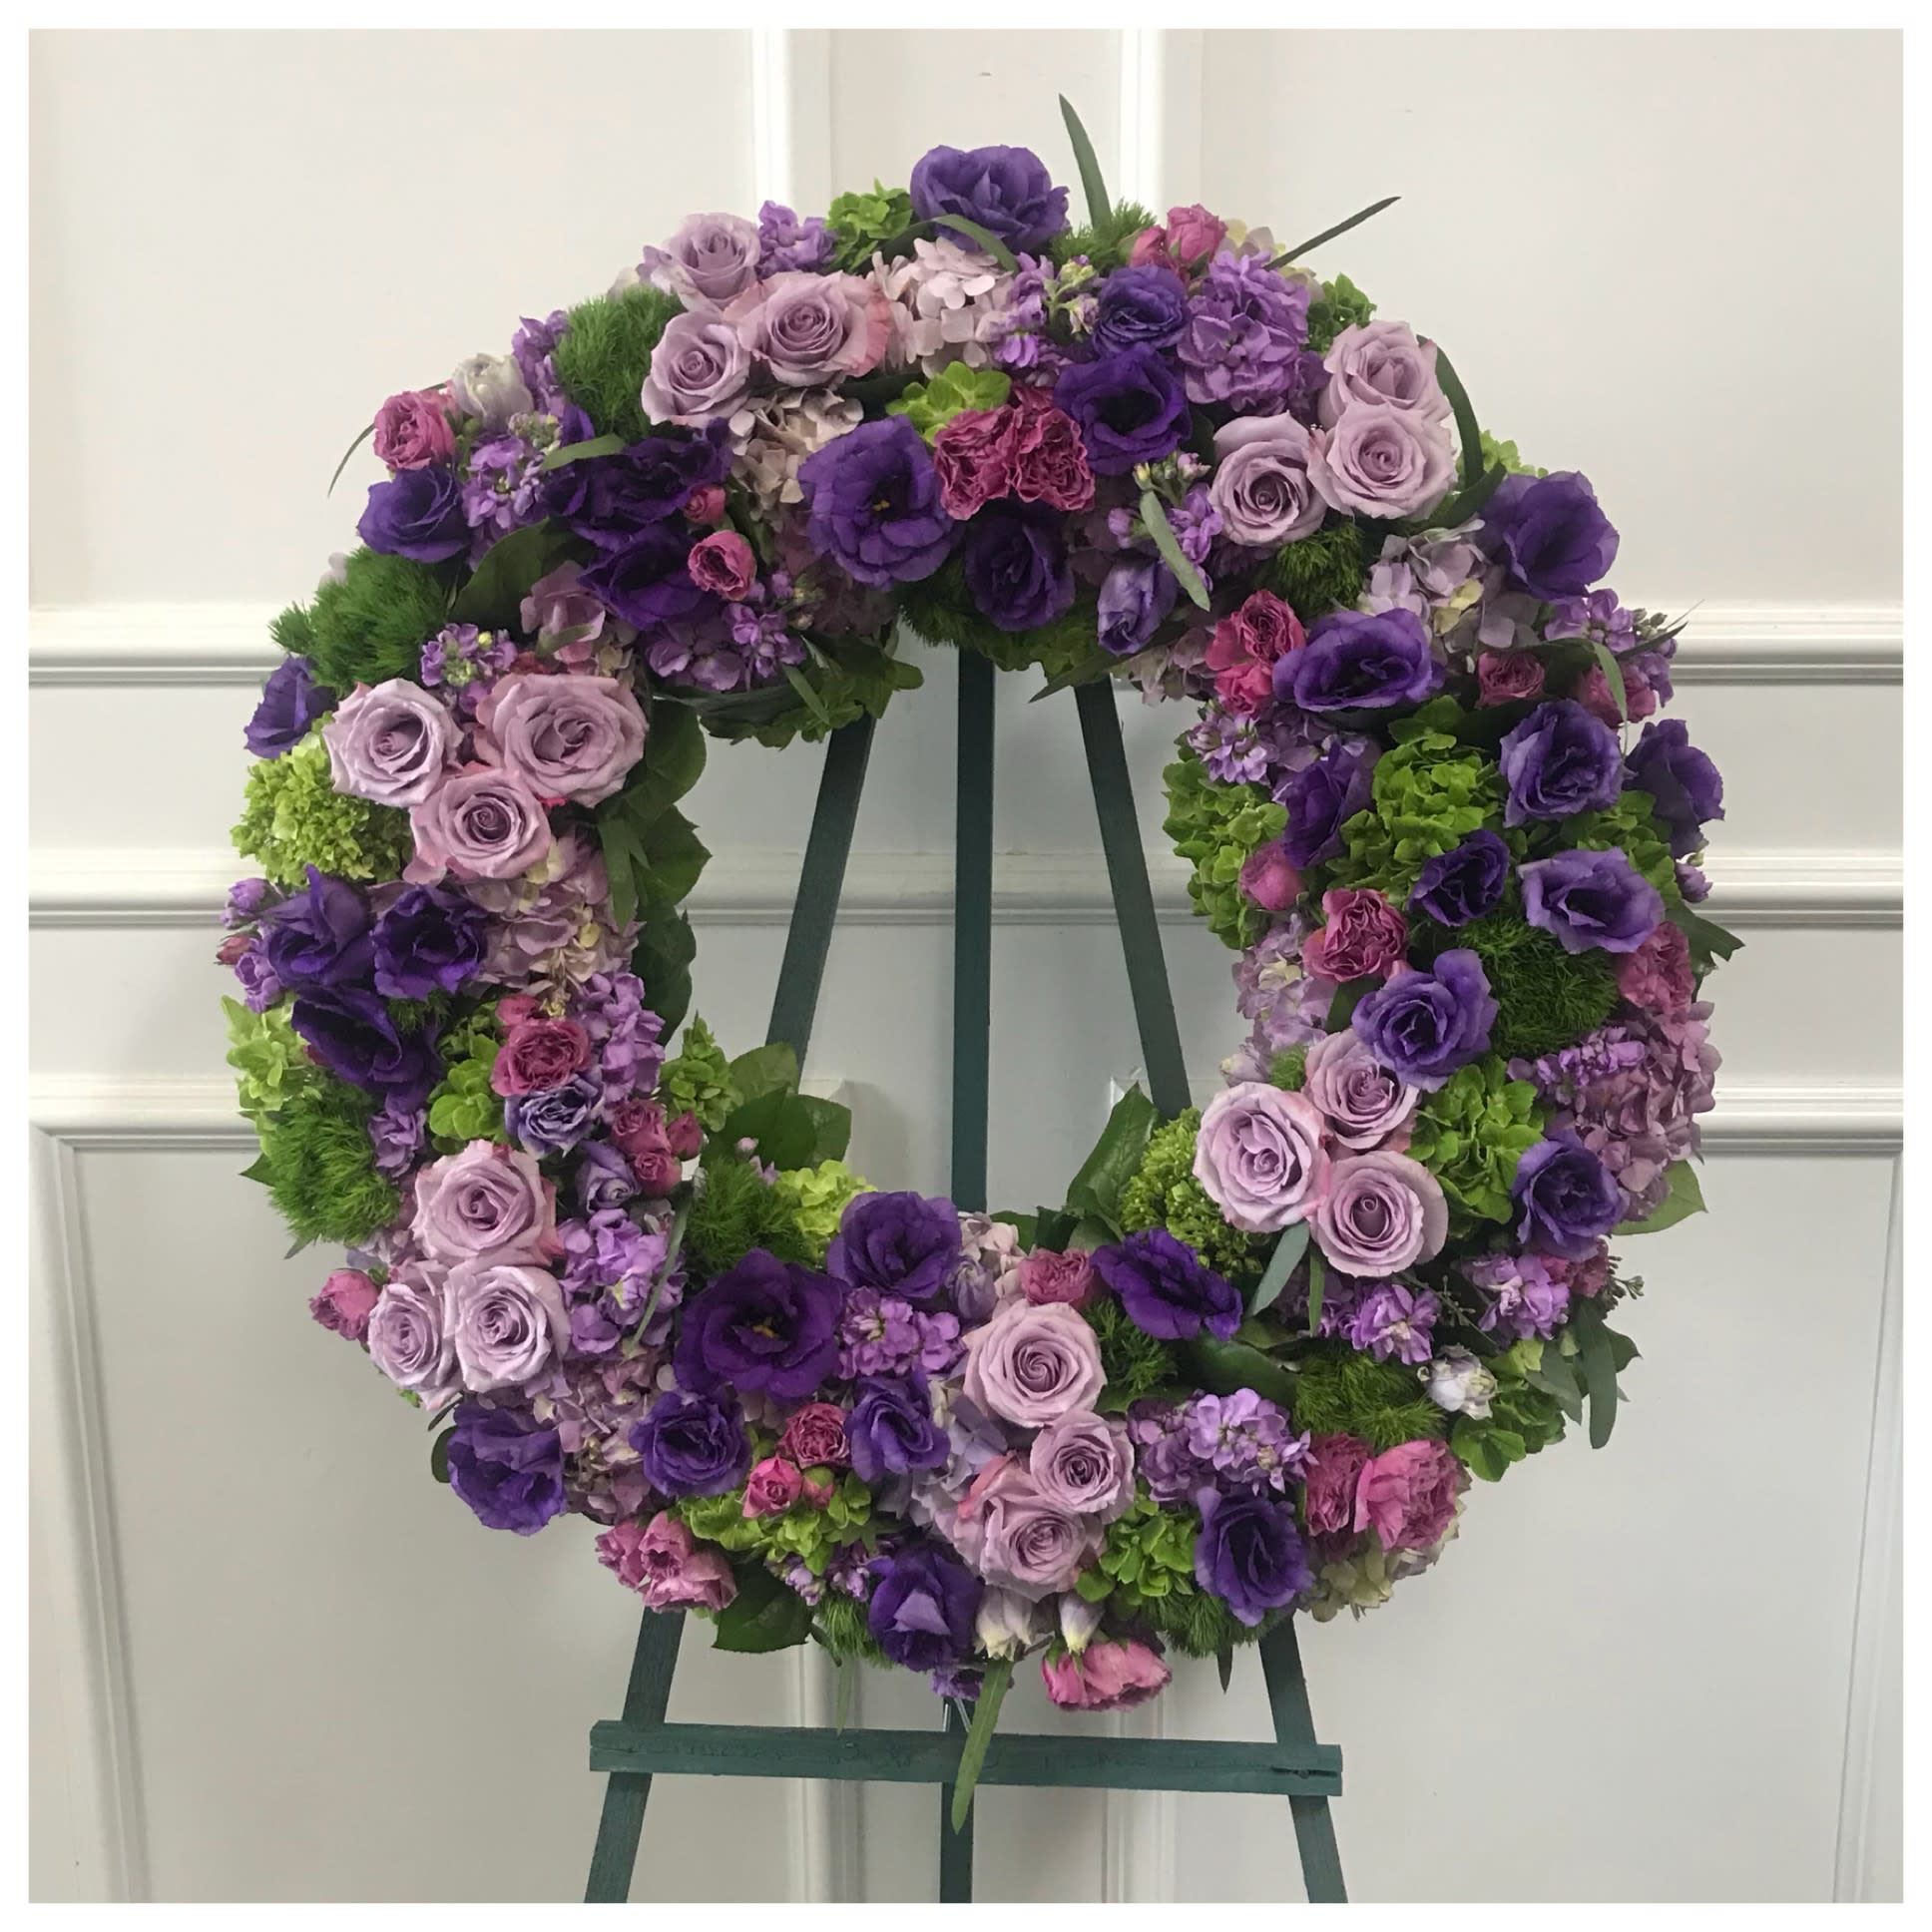 Serenity - Elegant Funeral Wreath for Delivery Today